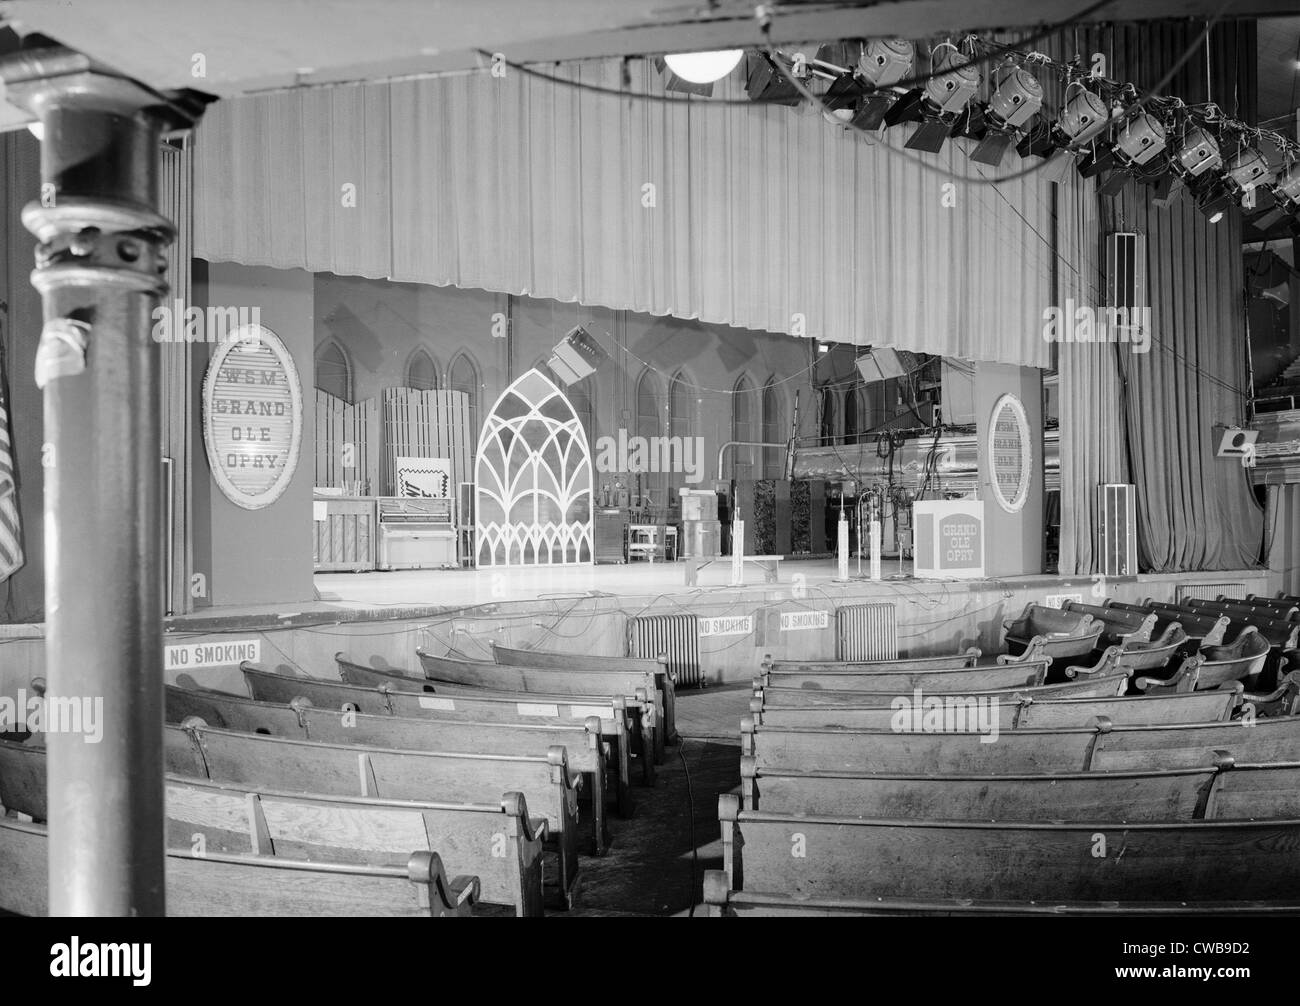 Le Grand Ole Opry, vers 1960 Banque D'Images